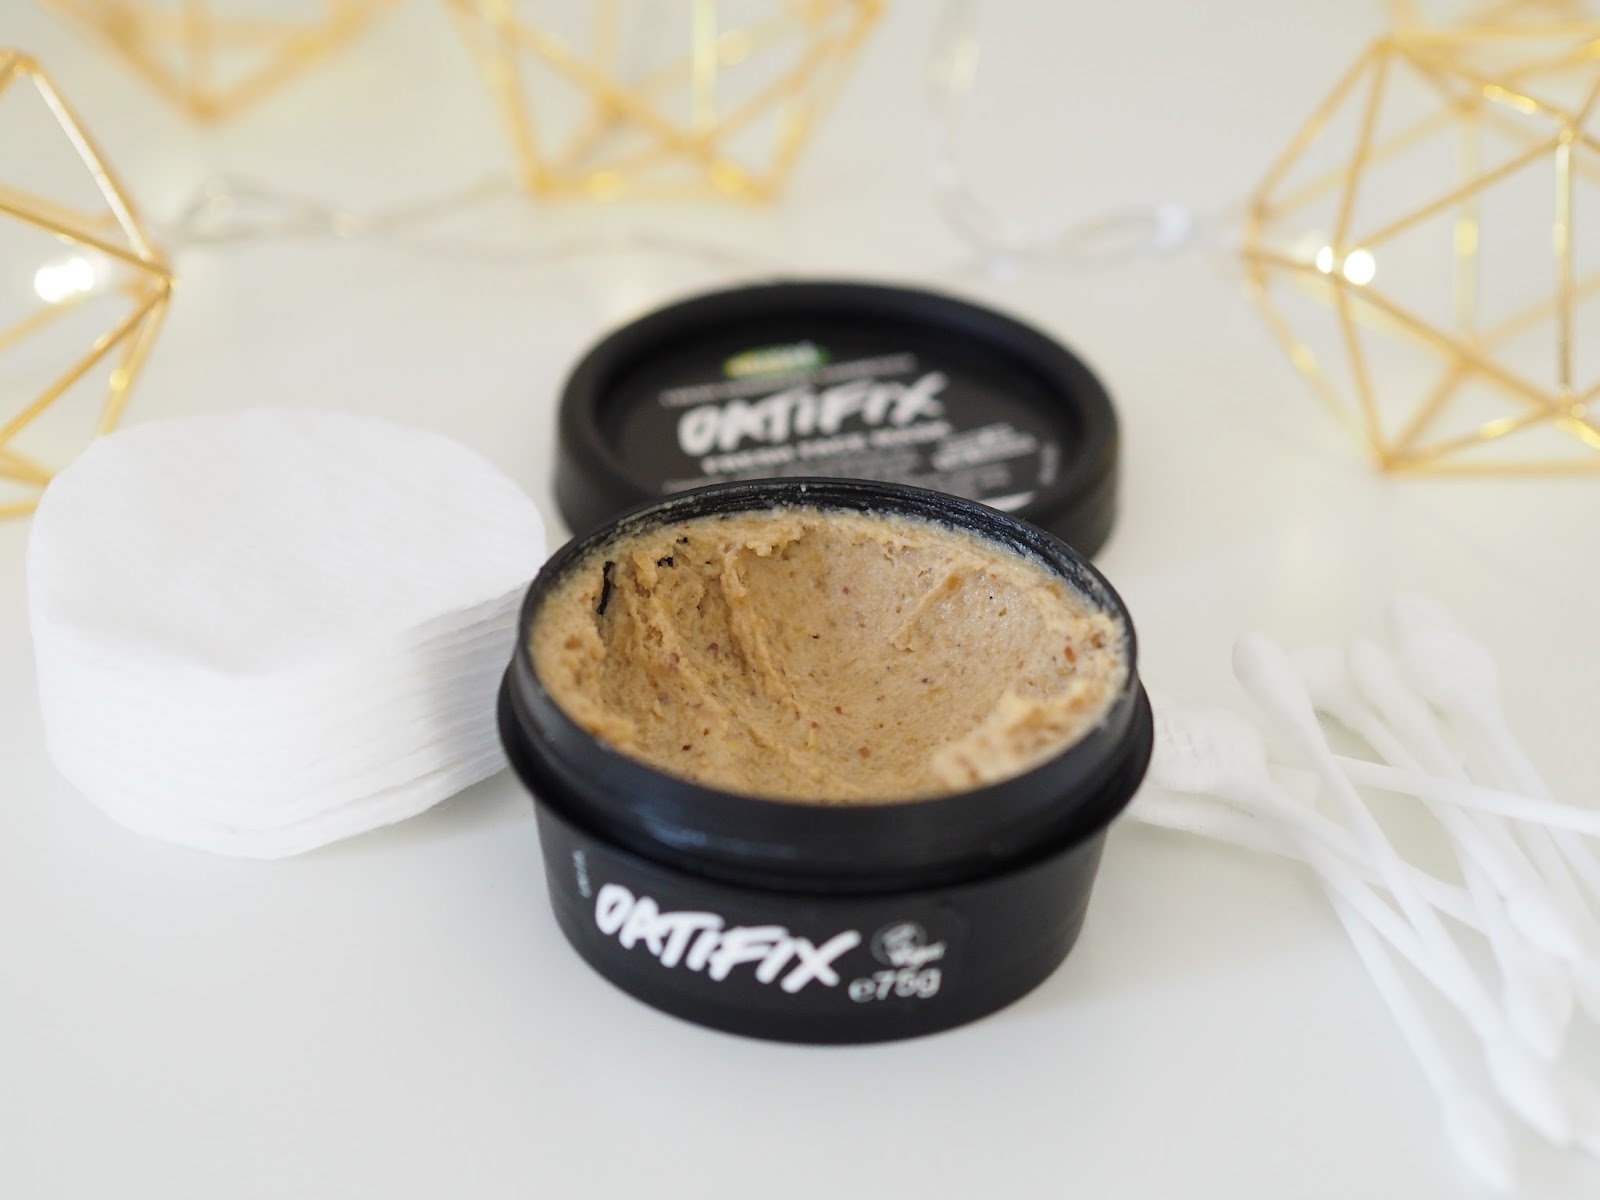 Lush review Oatifix fresh face mask skincare beauty Priceless Life of Mine Over 40 lifestyle blog